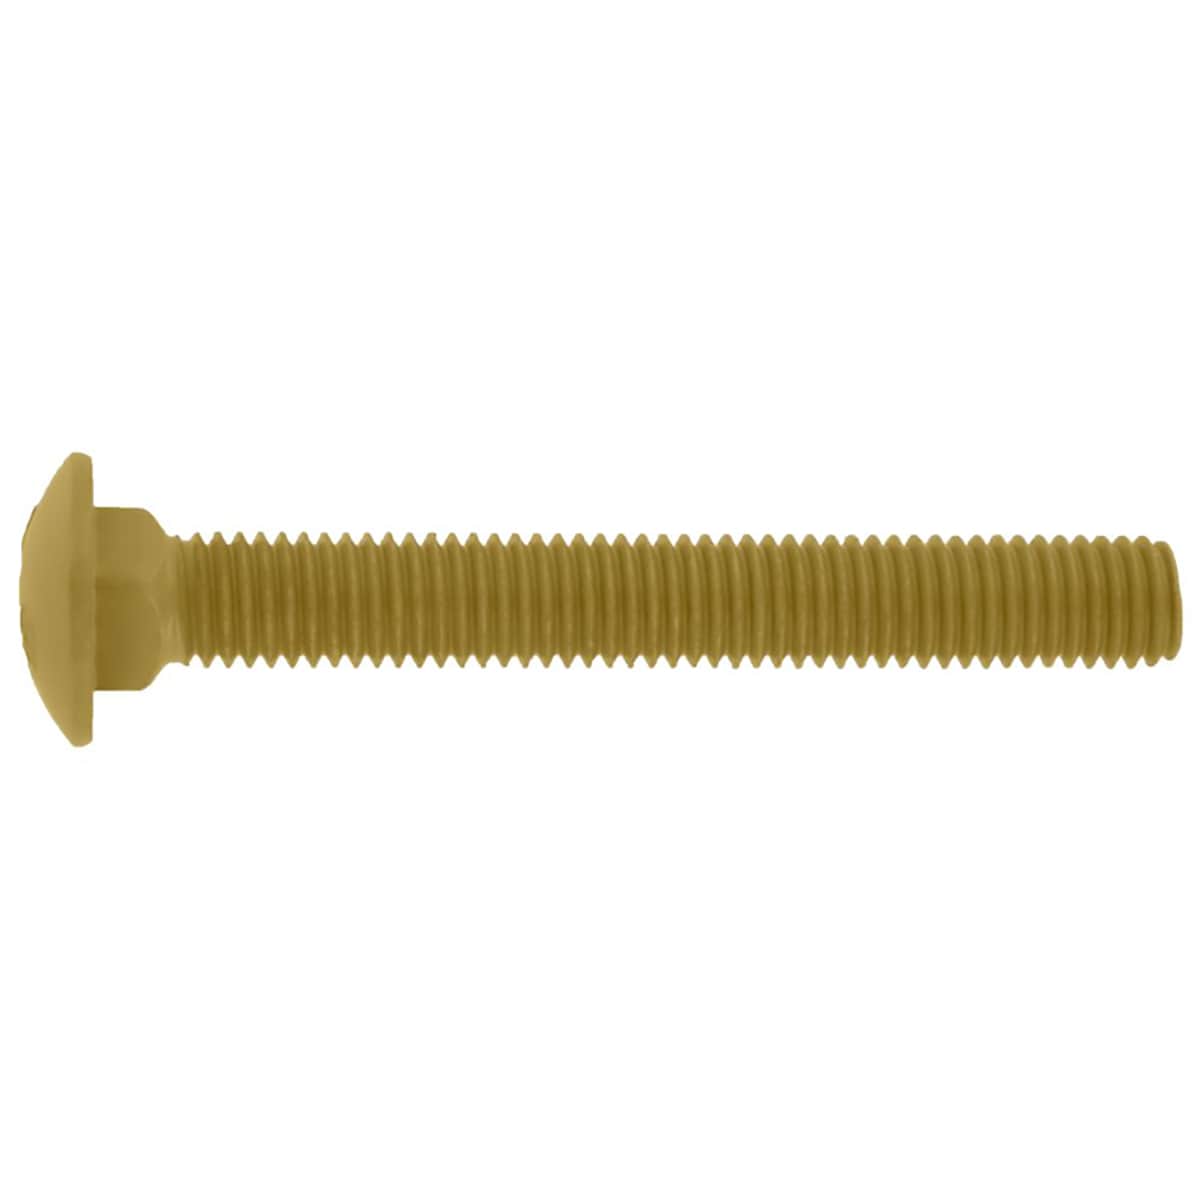 School Smart Fastener, Size 2, 1/2 Inches, Brass Plated, Pack of 100